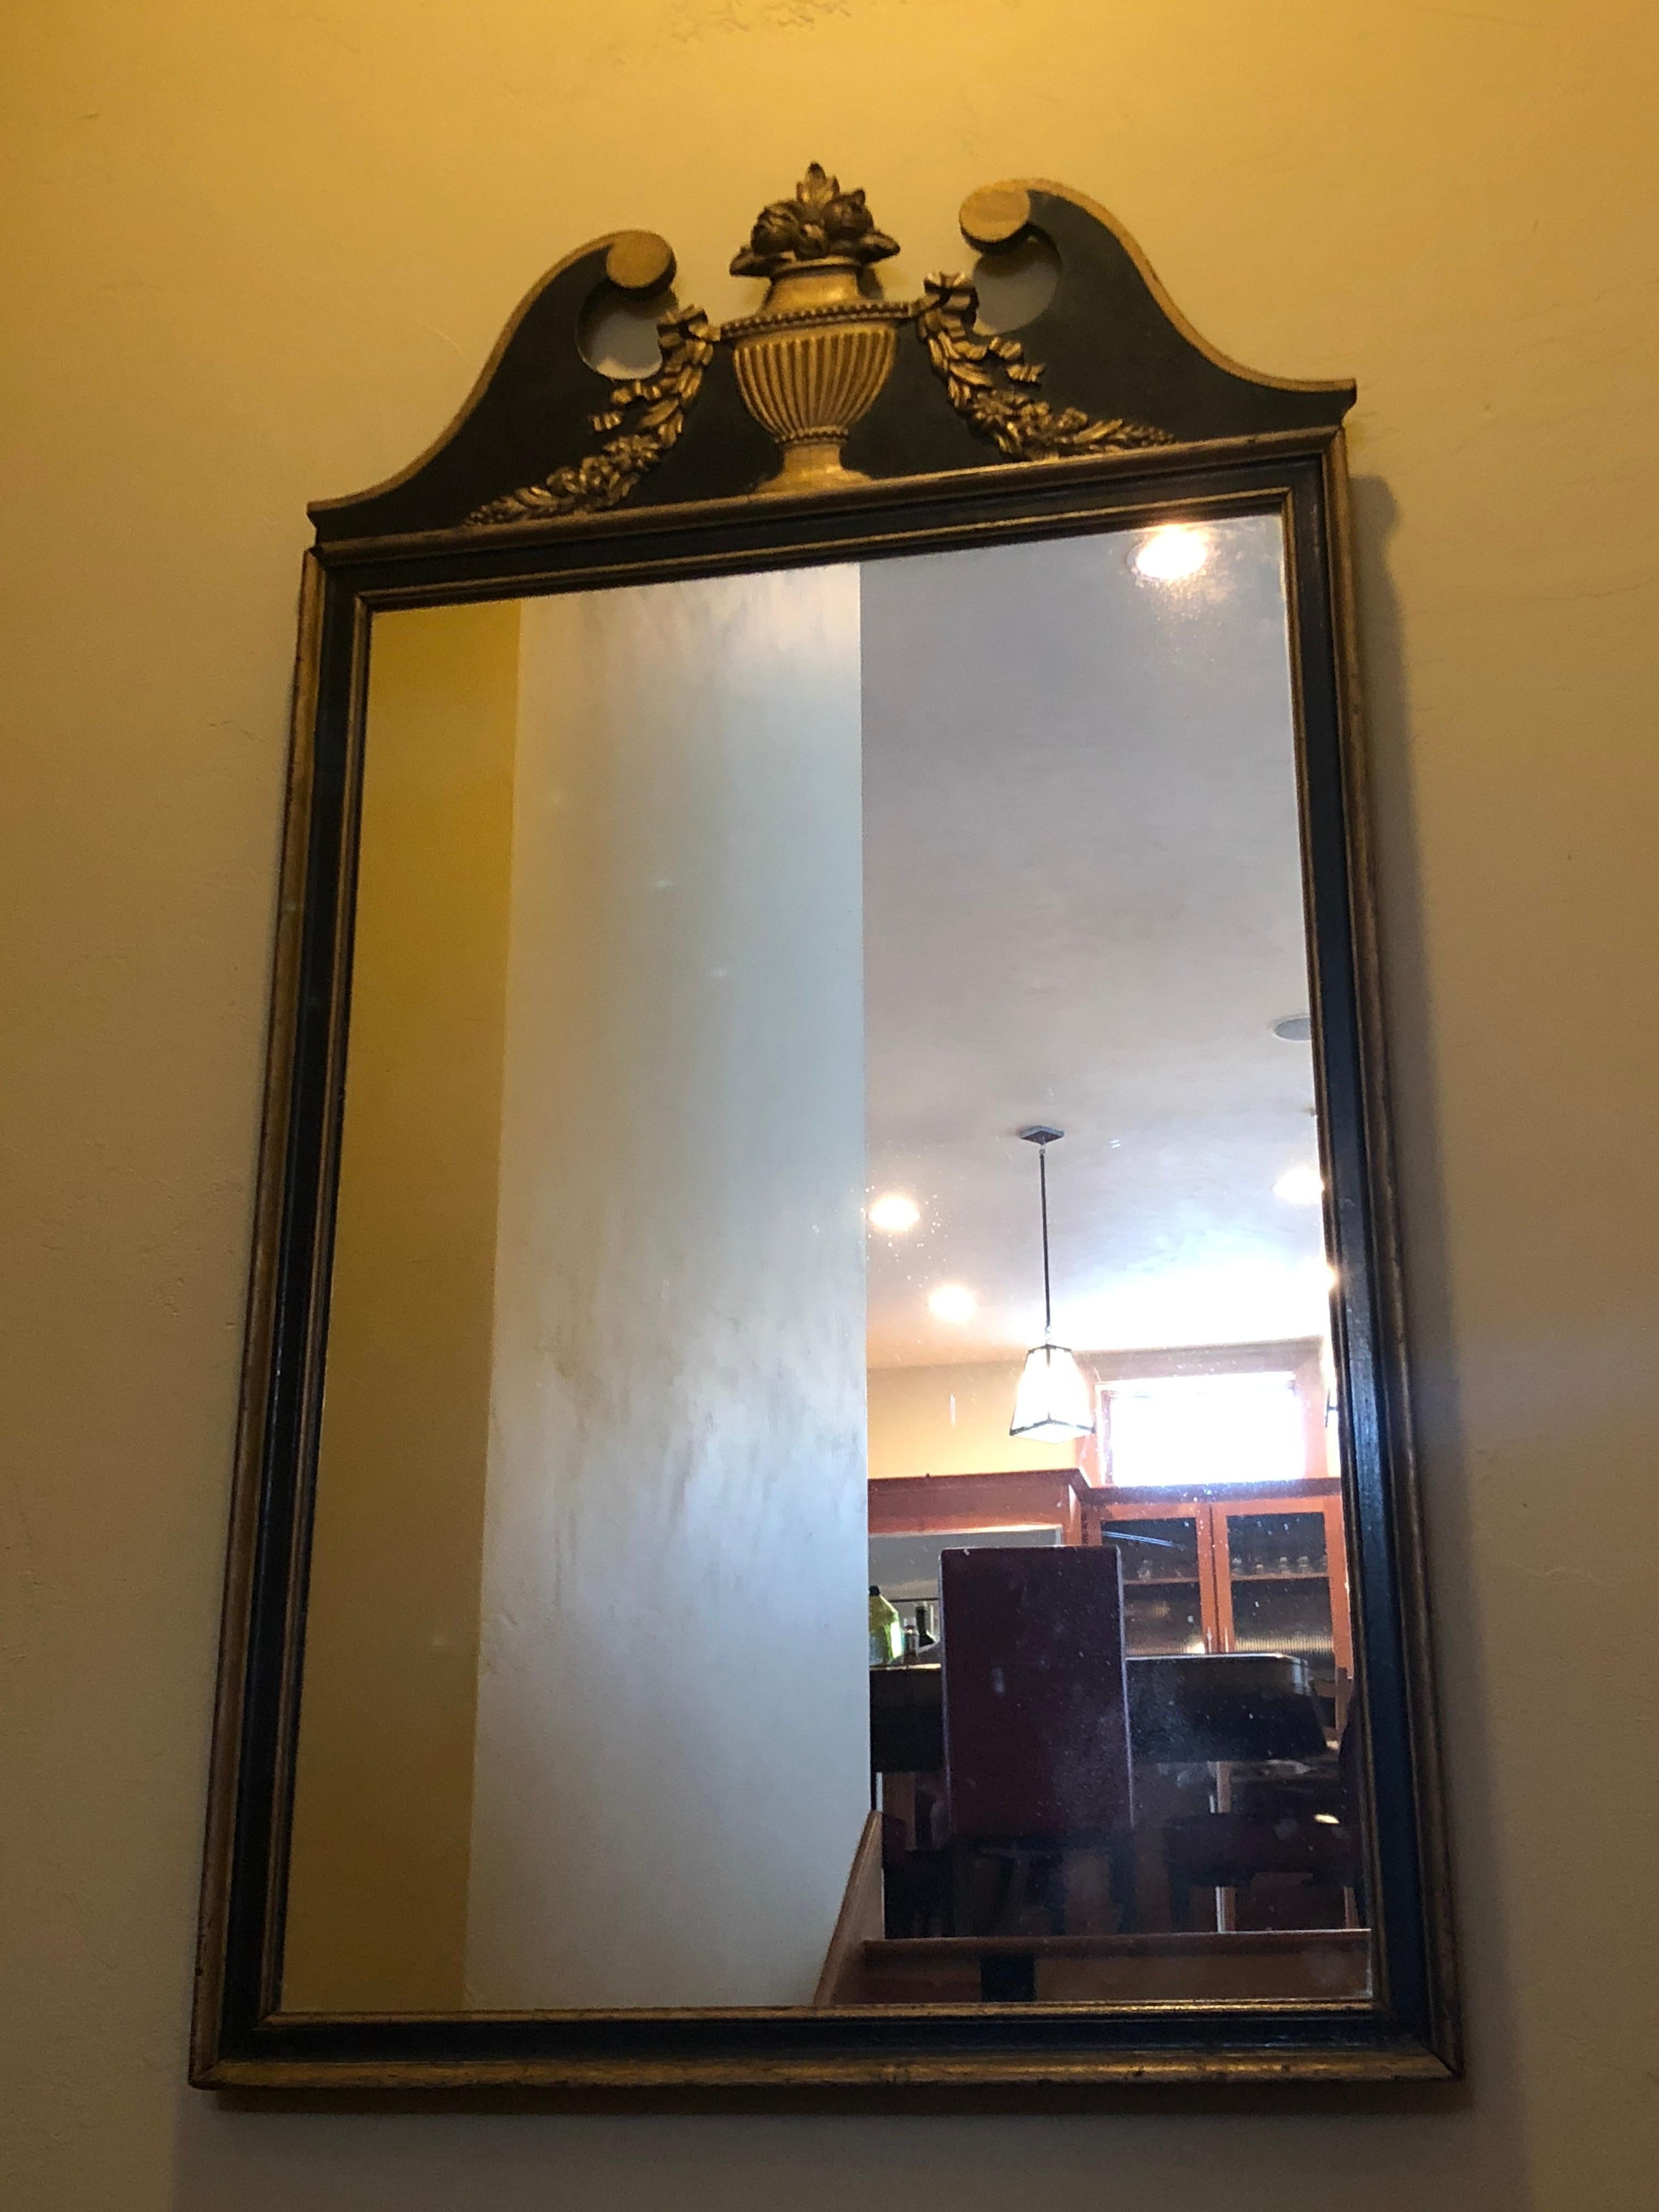 Lovely black and gilt neoclassical mirror. The paint and the mirror are original and have not been retouched. For a hallway or in an elegant gentleman’s dressing quarters the black and gilt are dramatic and understated. The condition of the paint is